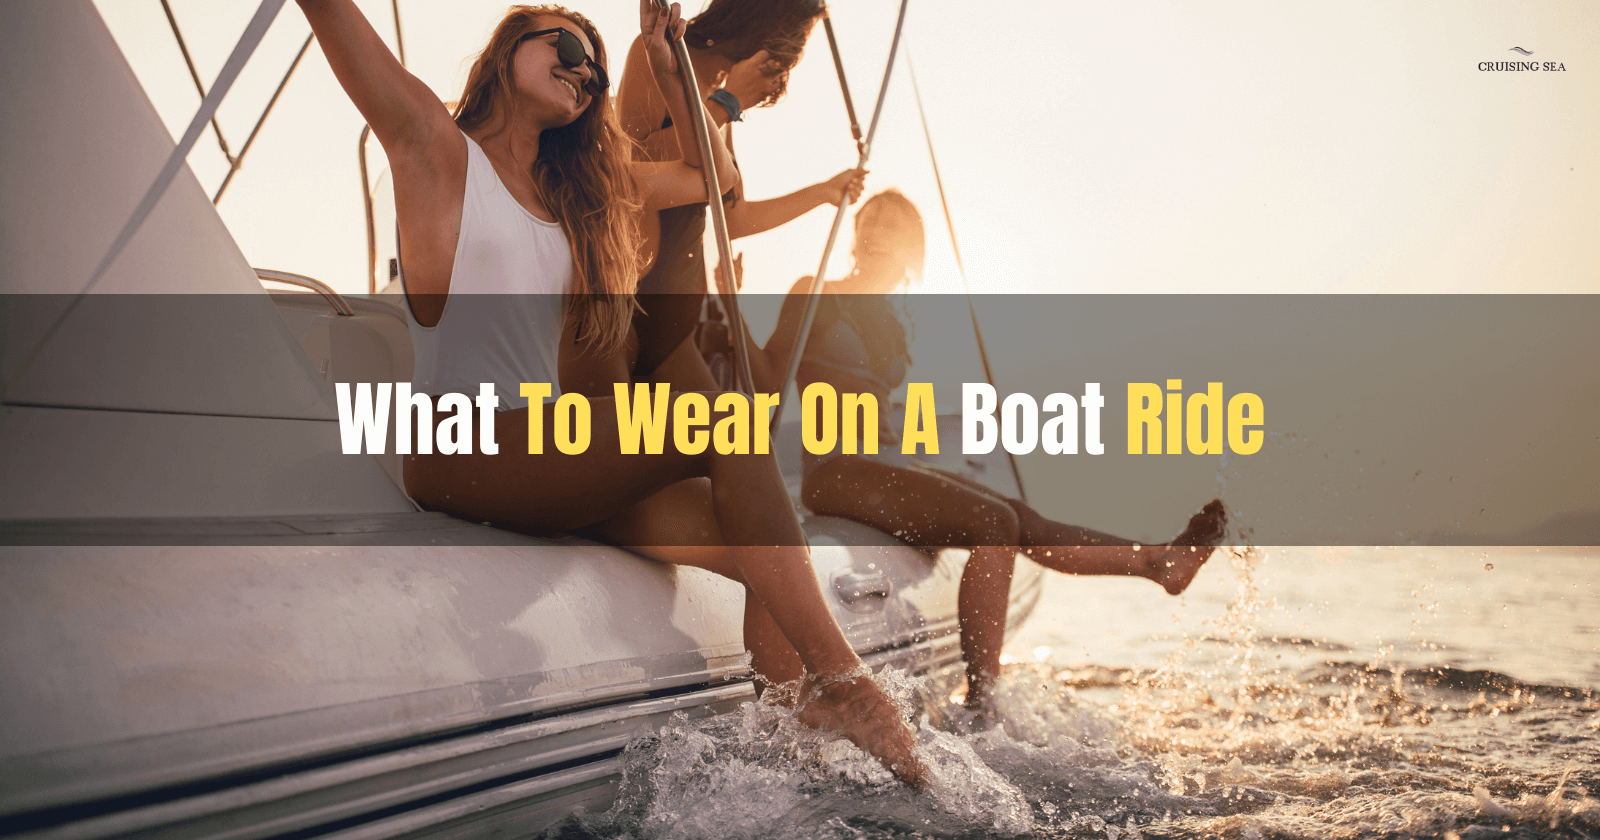 What to wear on a boat ride